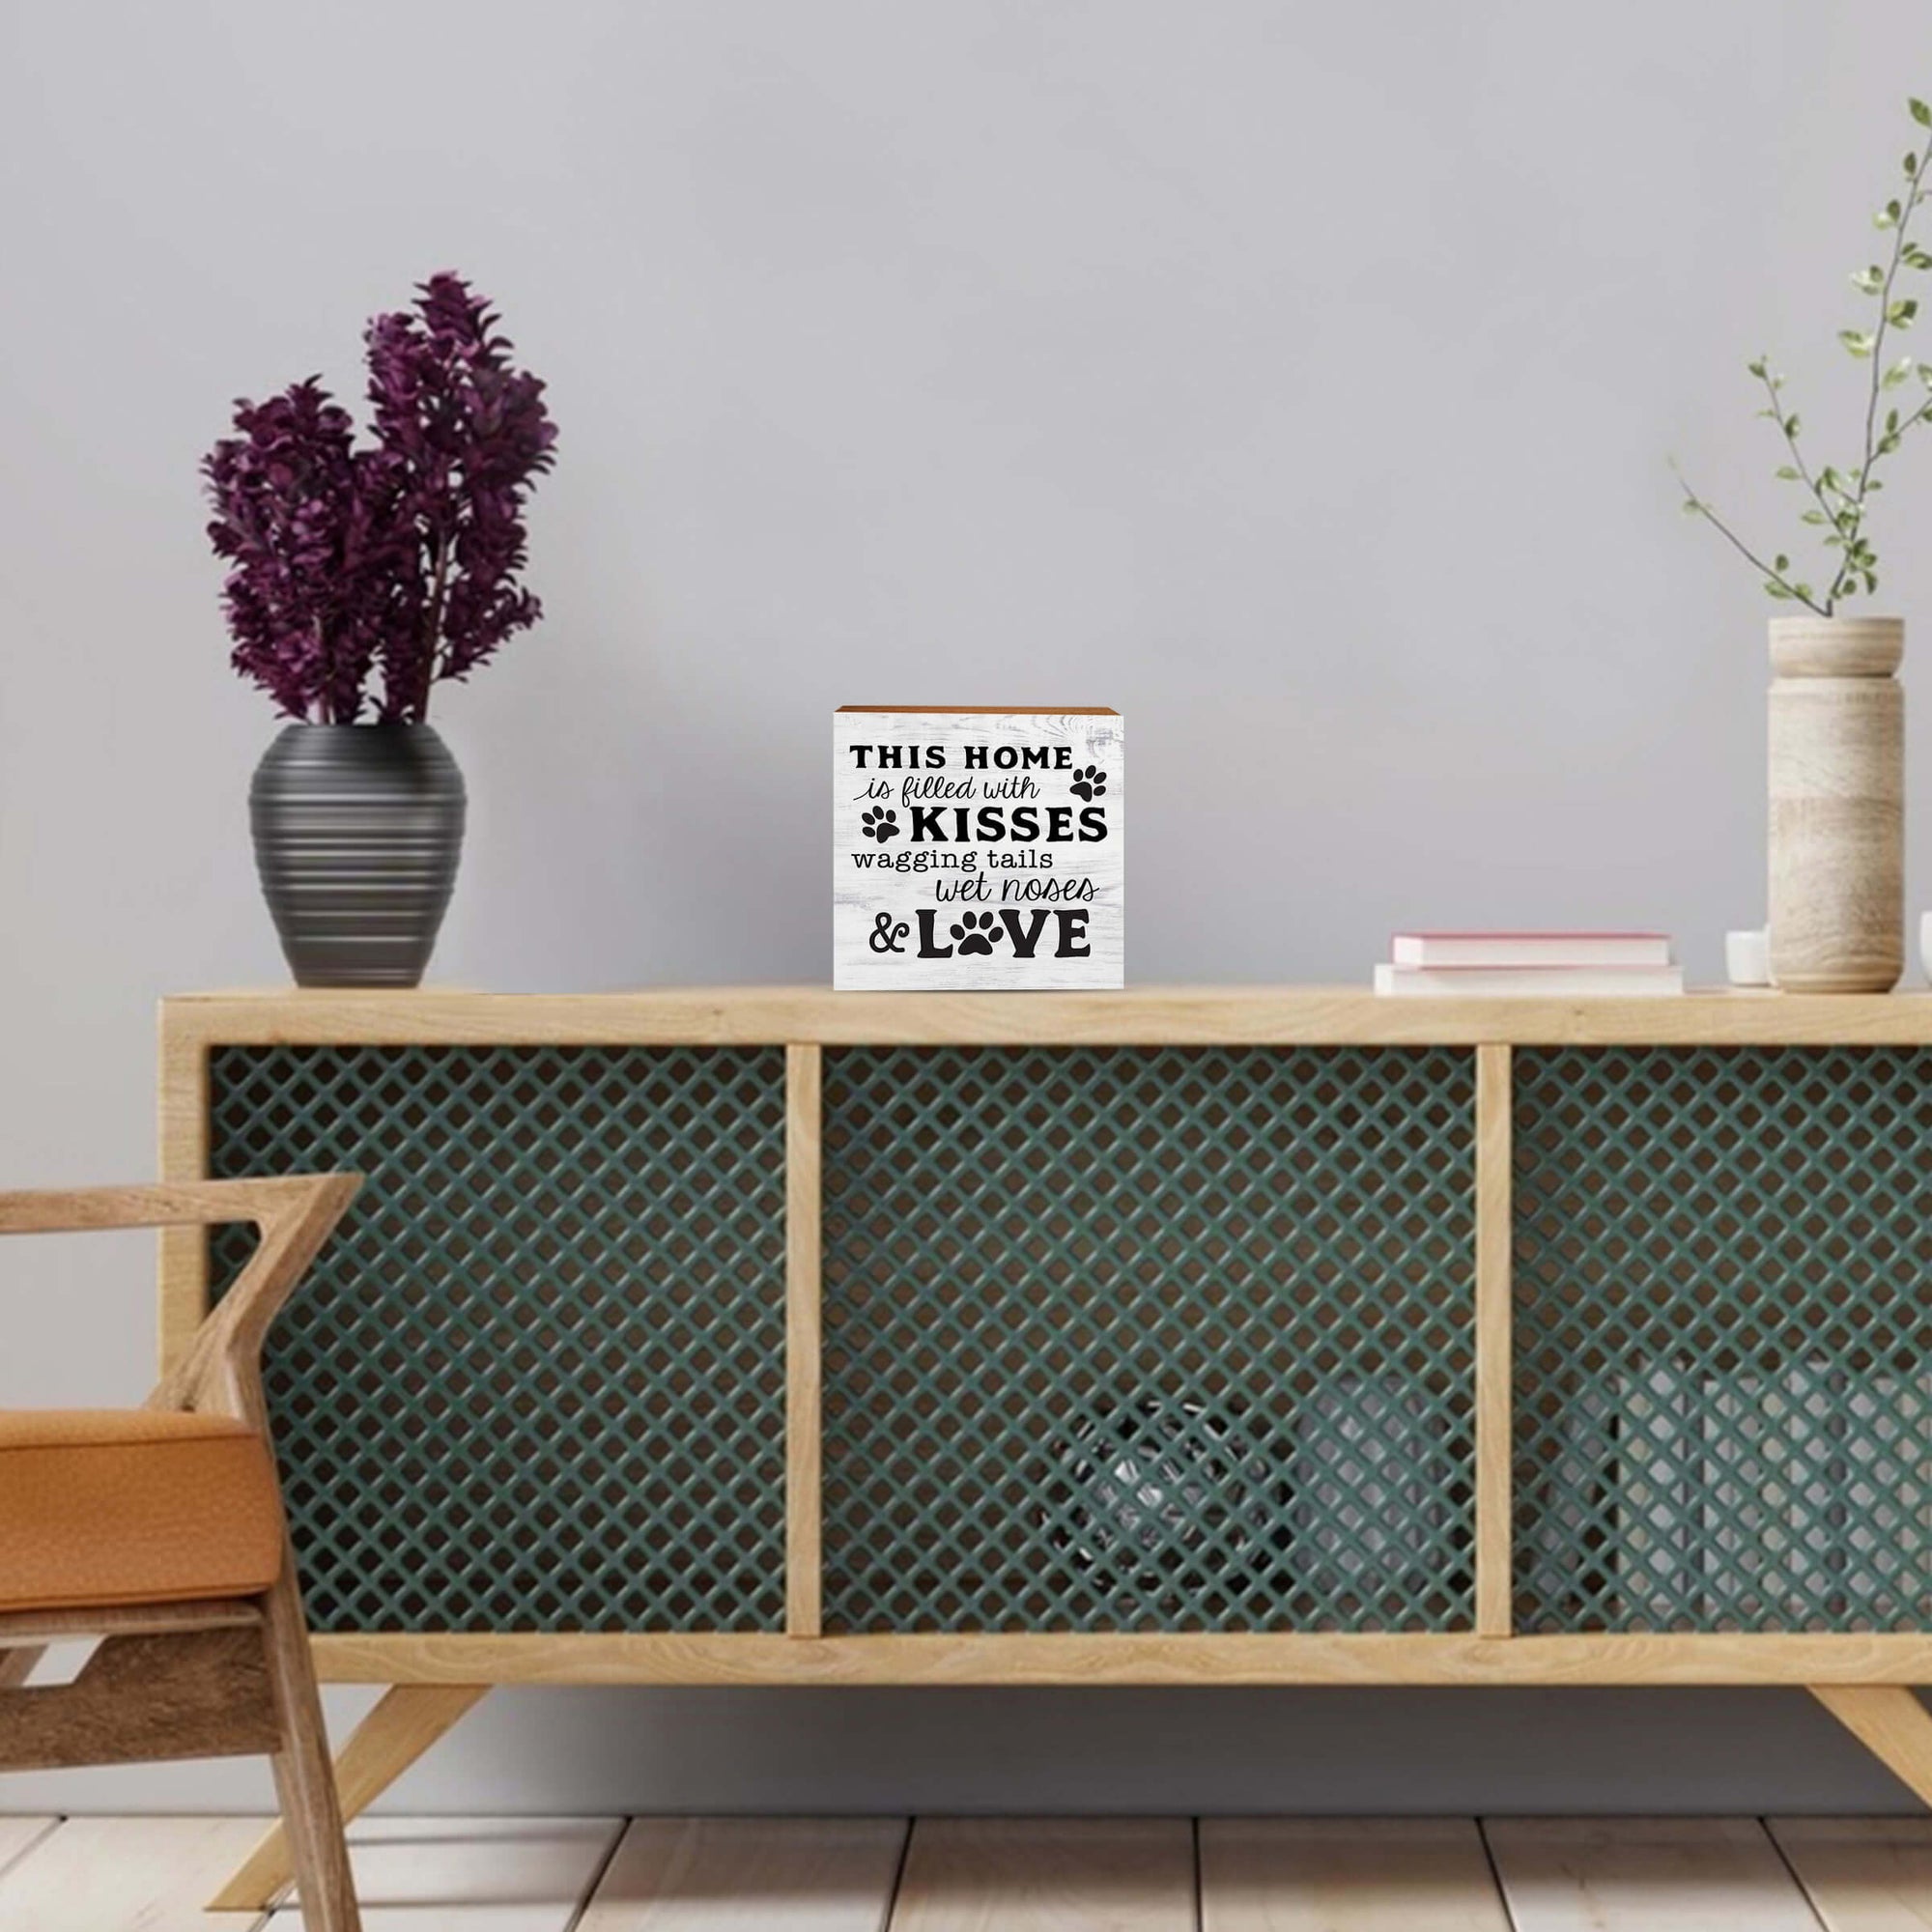 Wooden Shelf Decor and Tabletop Signs with Pet Verses - Filled With Kisses